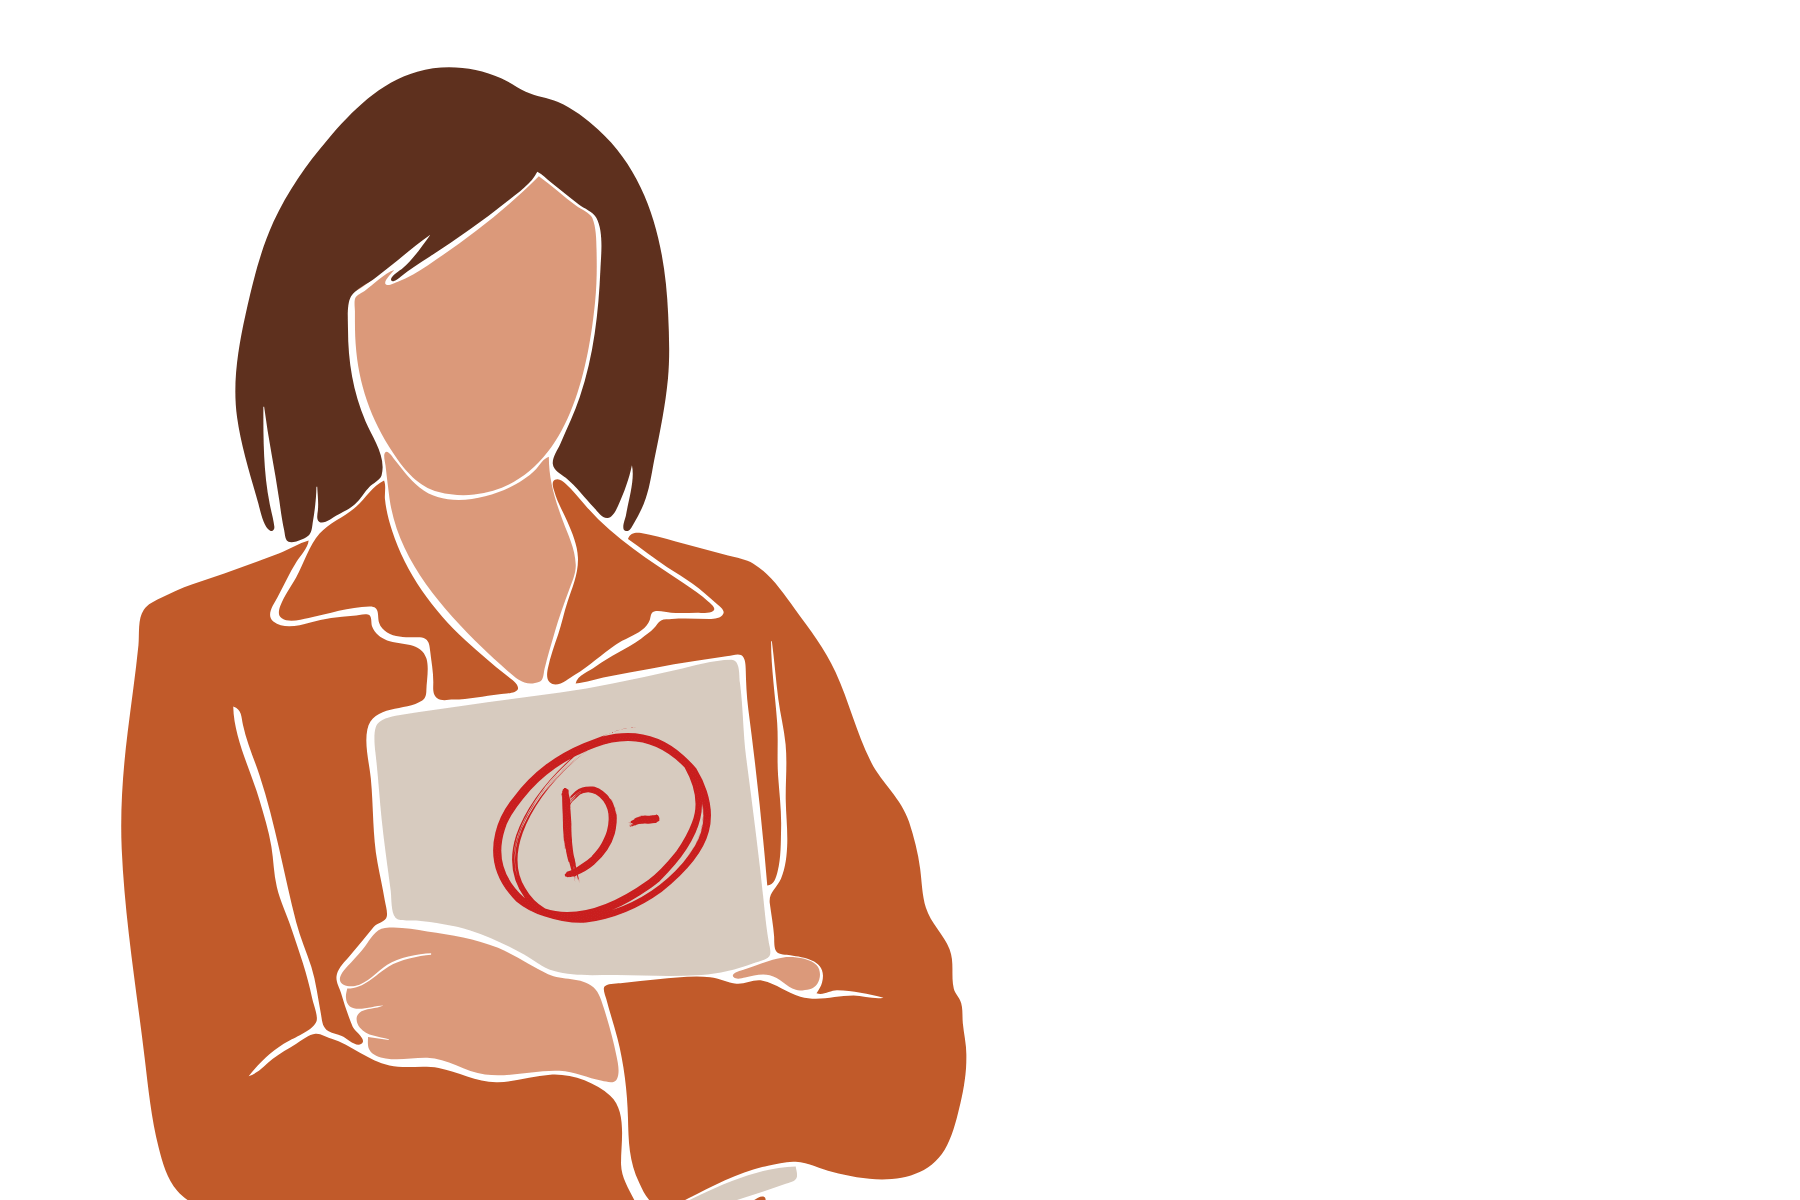 photo of a faceless person with straight brown hair holding a report card with a D on it.